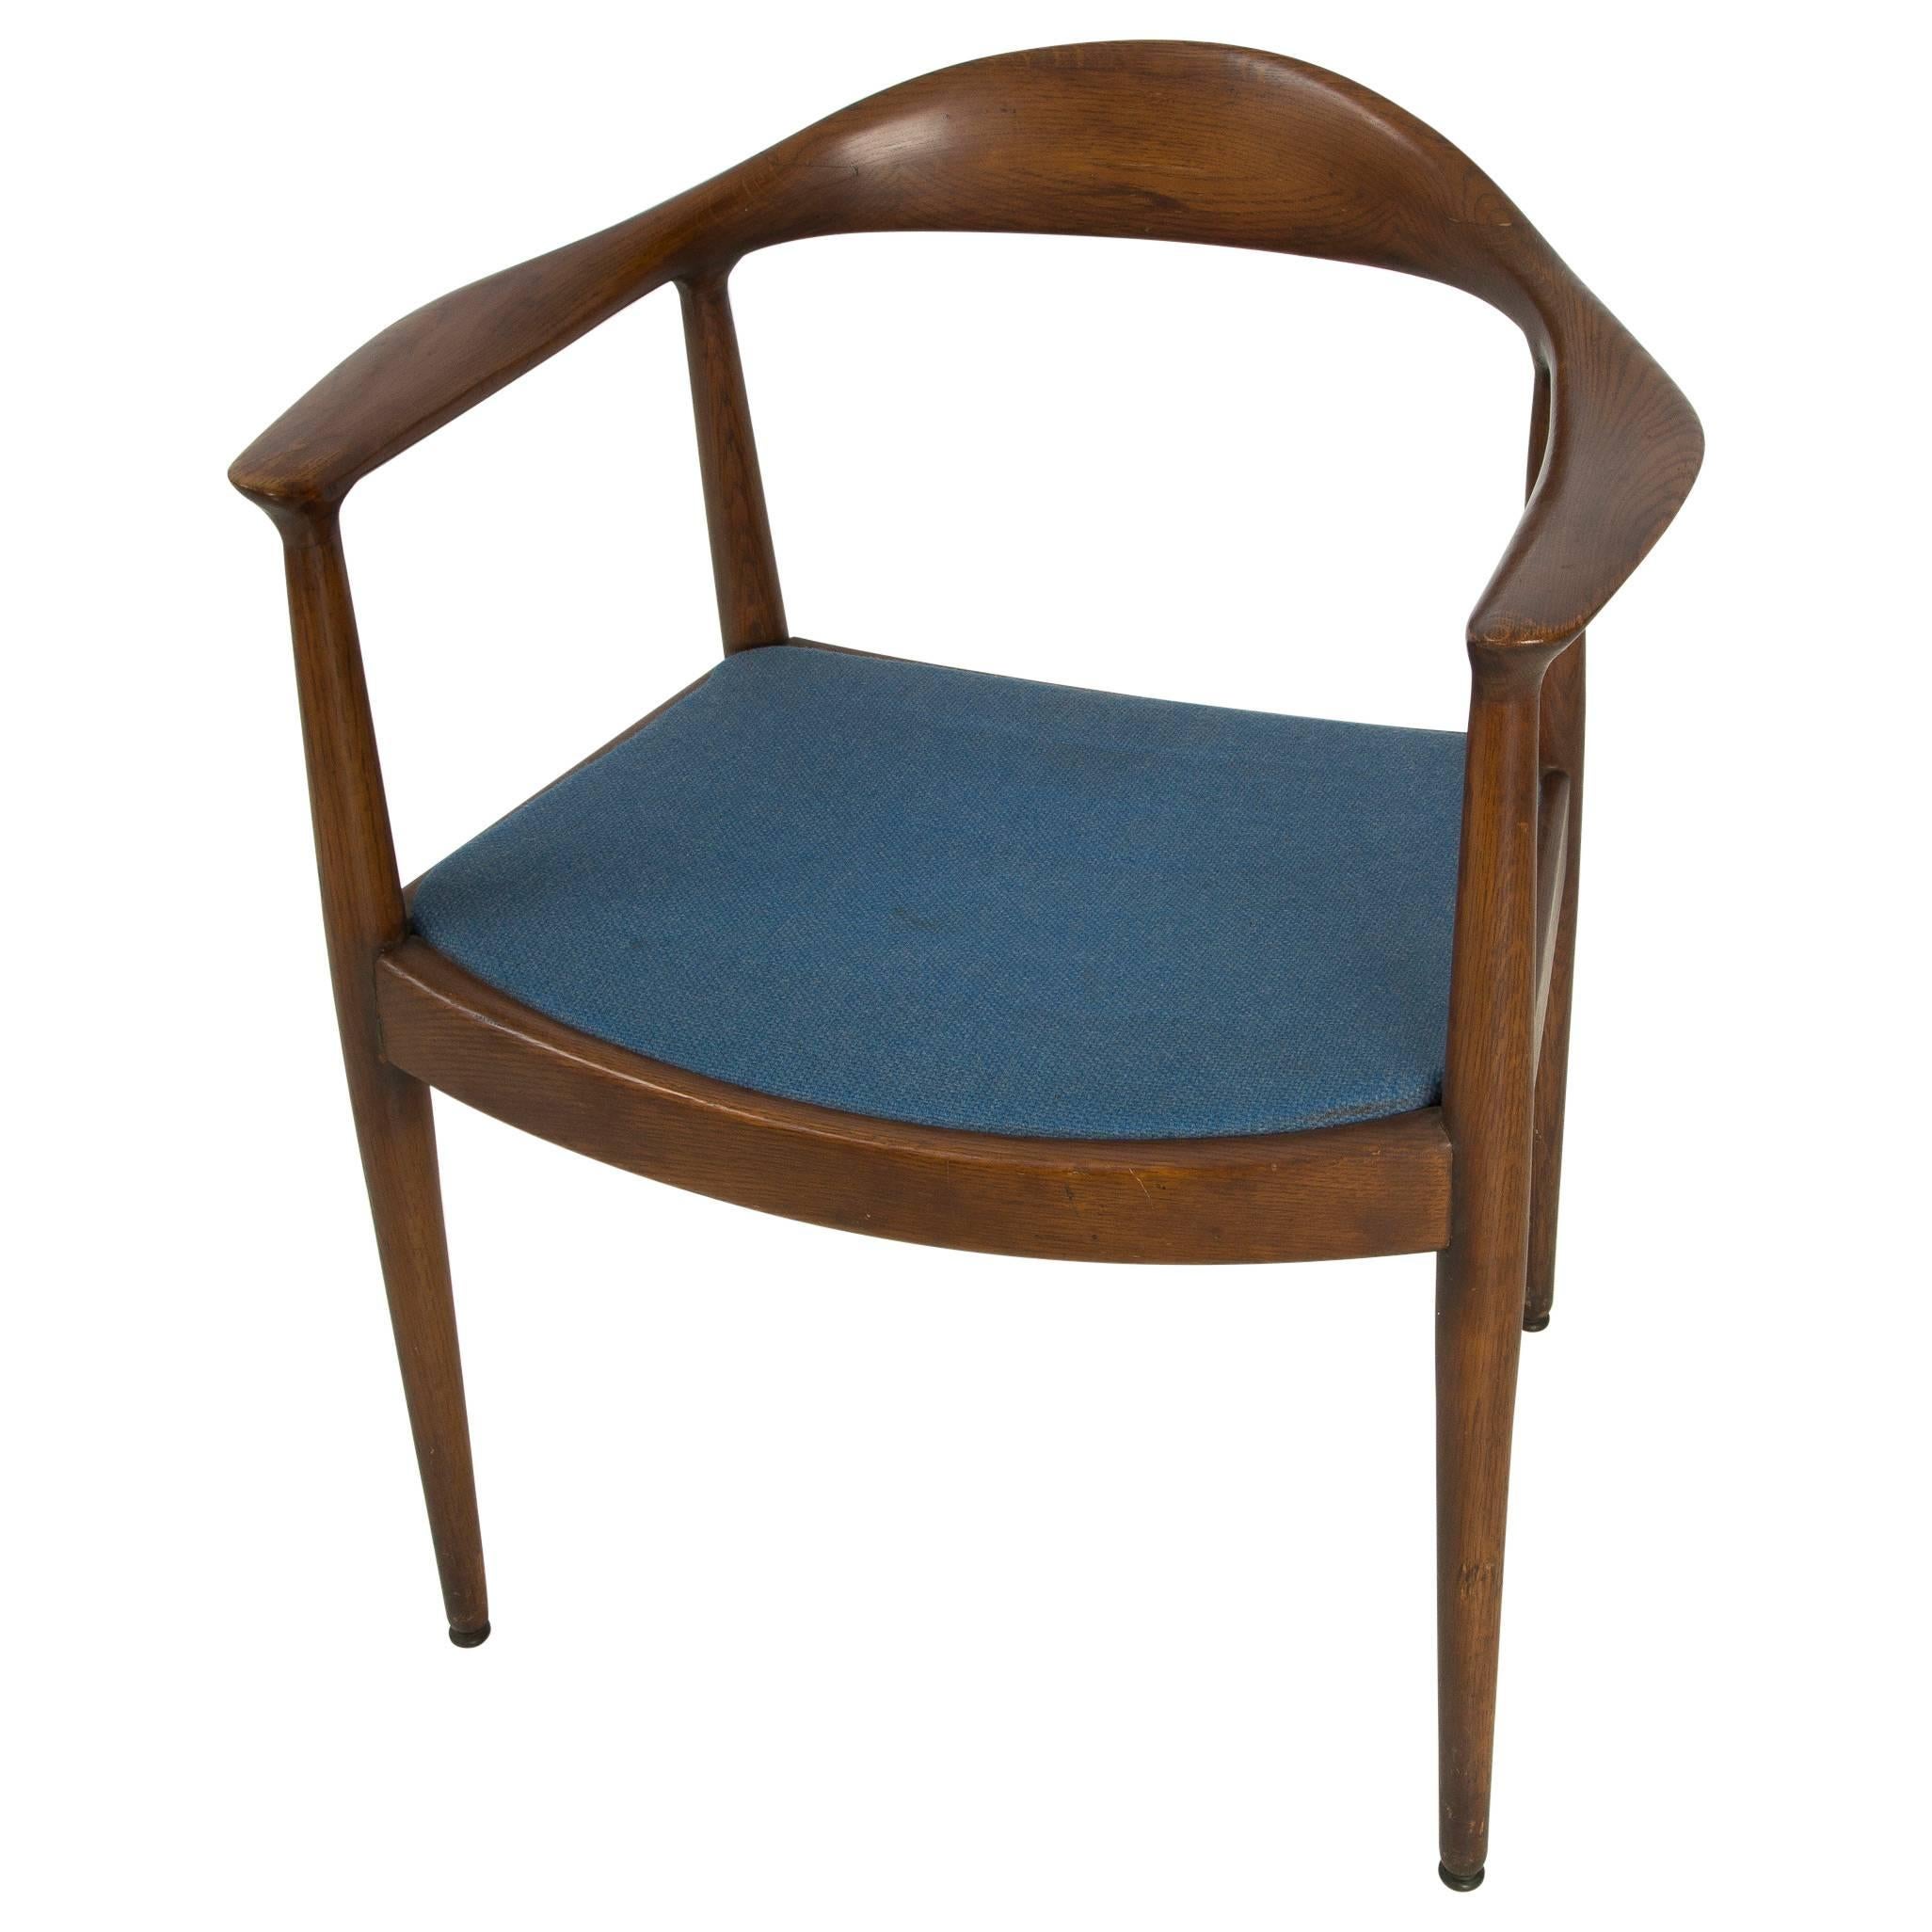 Pair of Blue Danish Modern Chairs Attributed to 